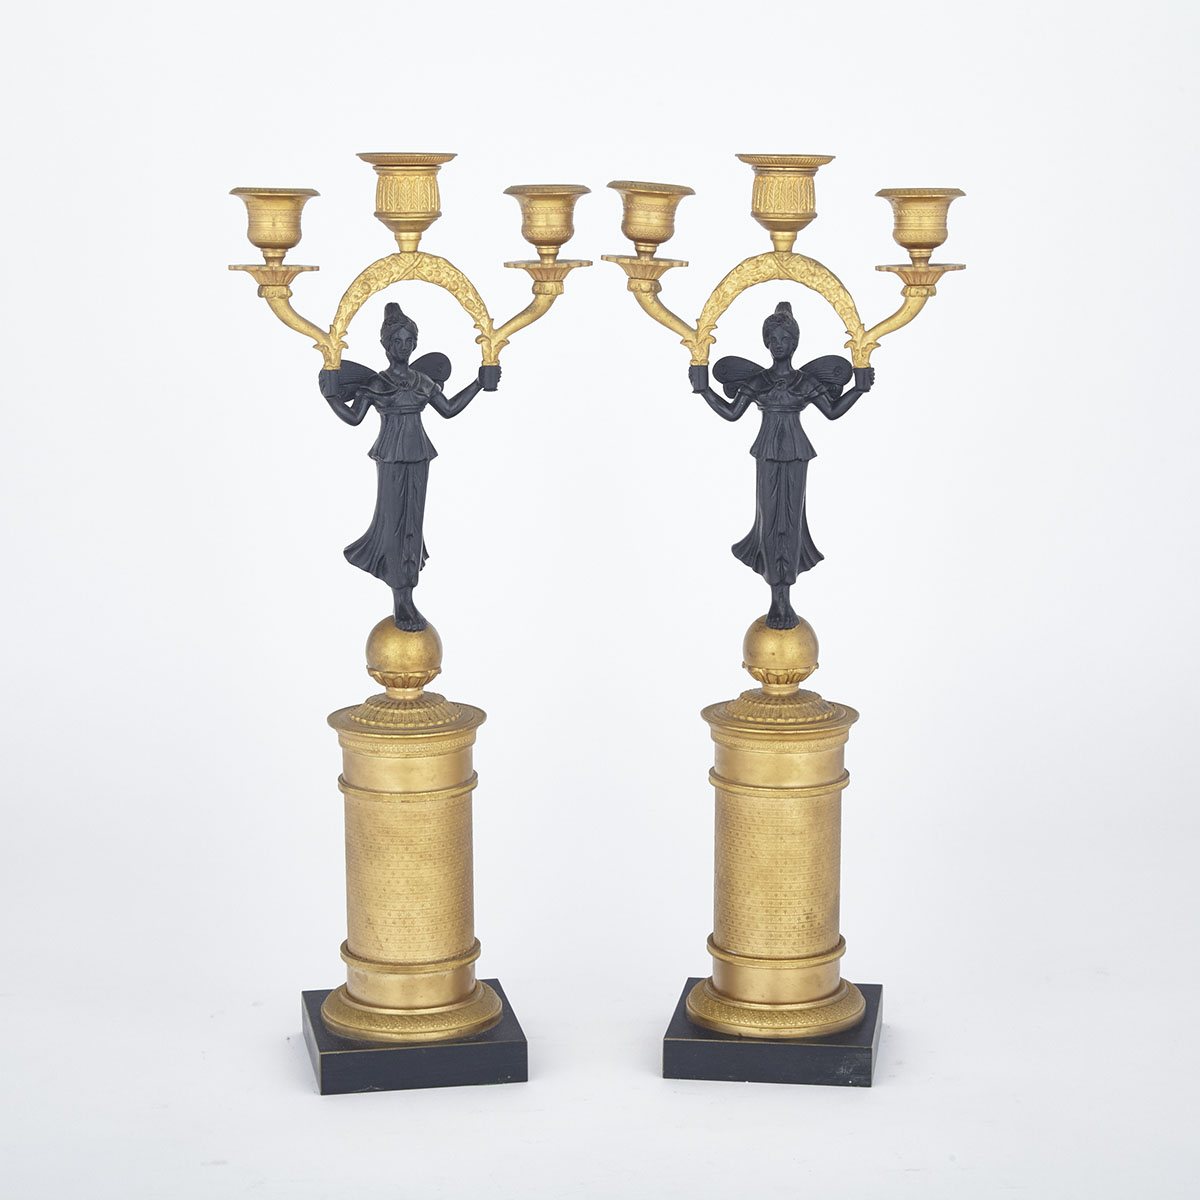 Pair of French Empire Style Gilt and Patinated Bronze Figural Three Light Candelabra, mid 20th century